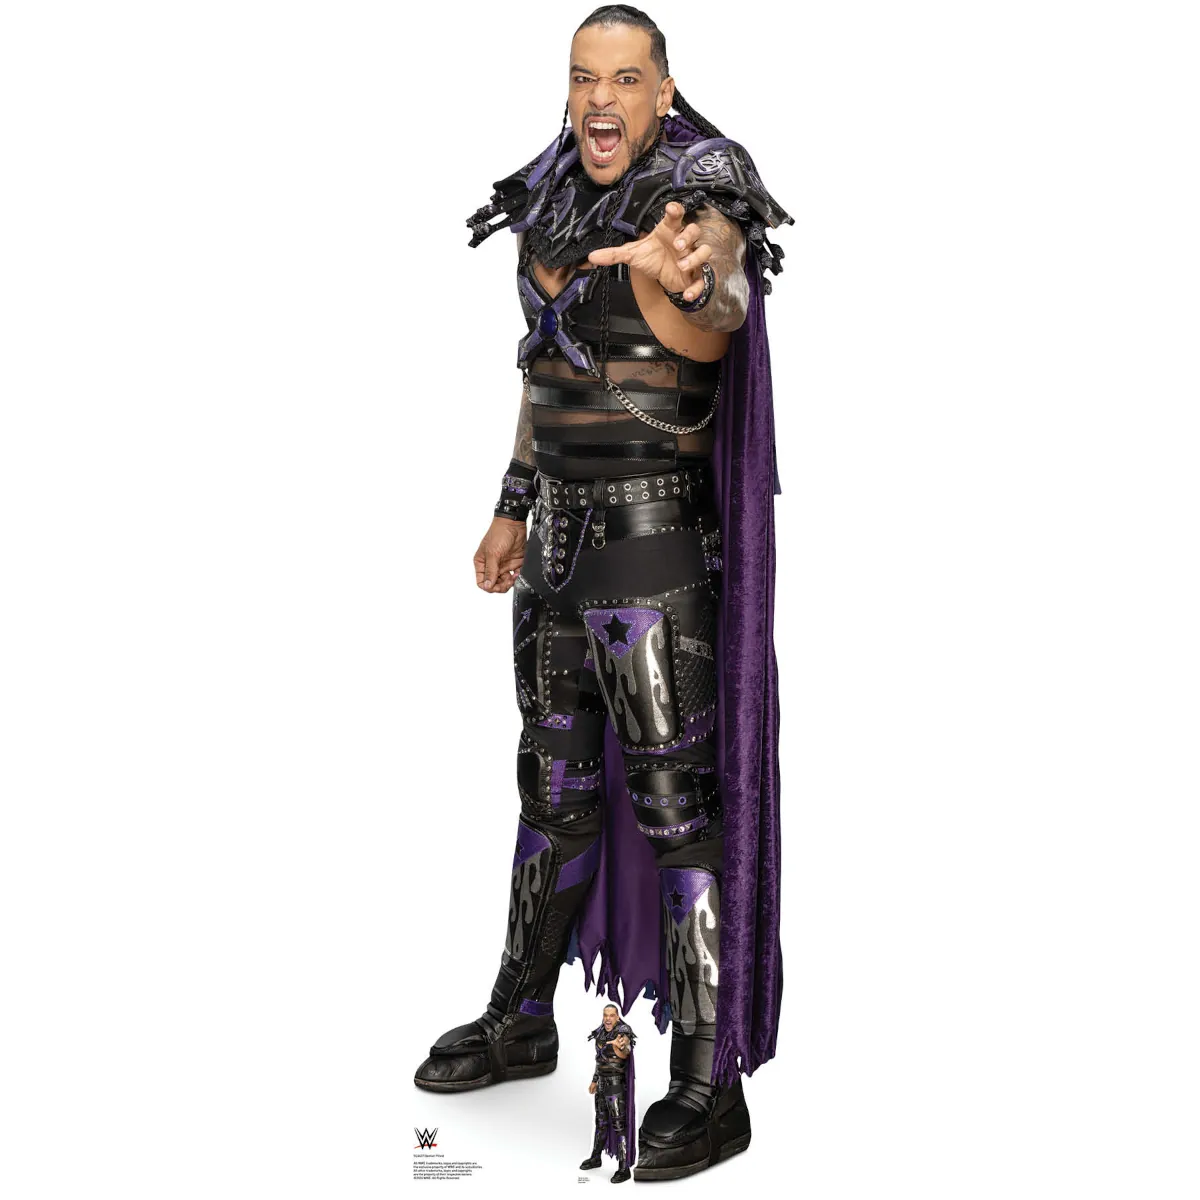 SC4427 Damian Priest (WWE) Official Lifesize + Mini Cardboard Cutout Standee Front